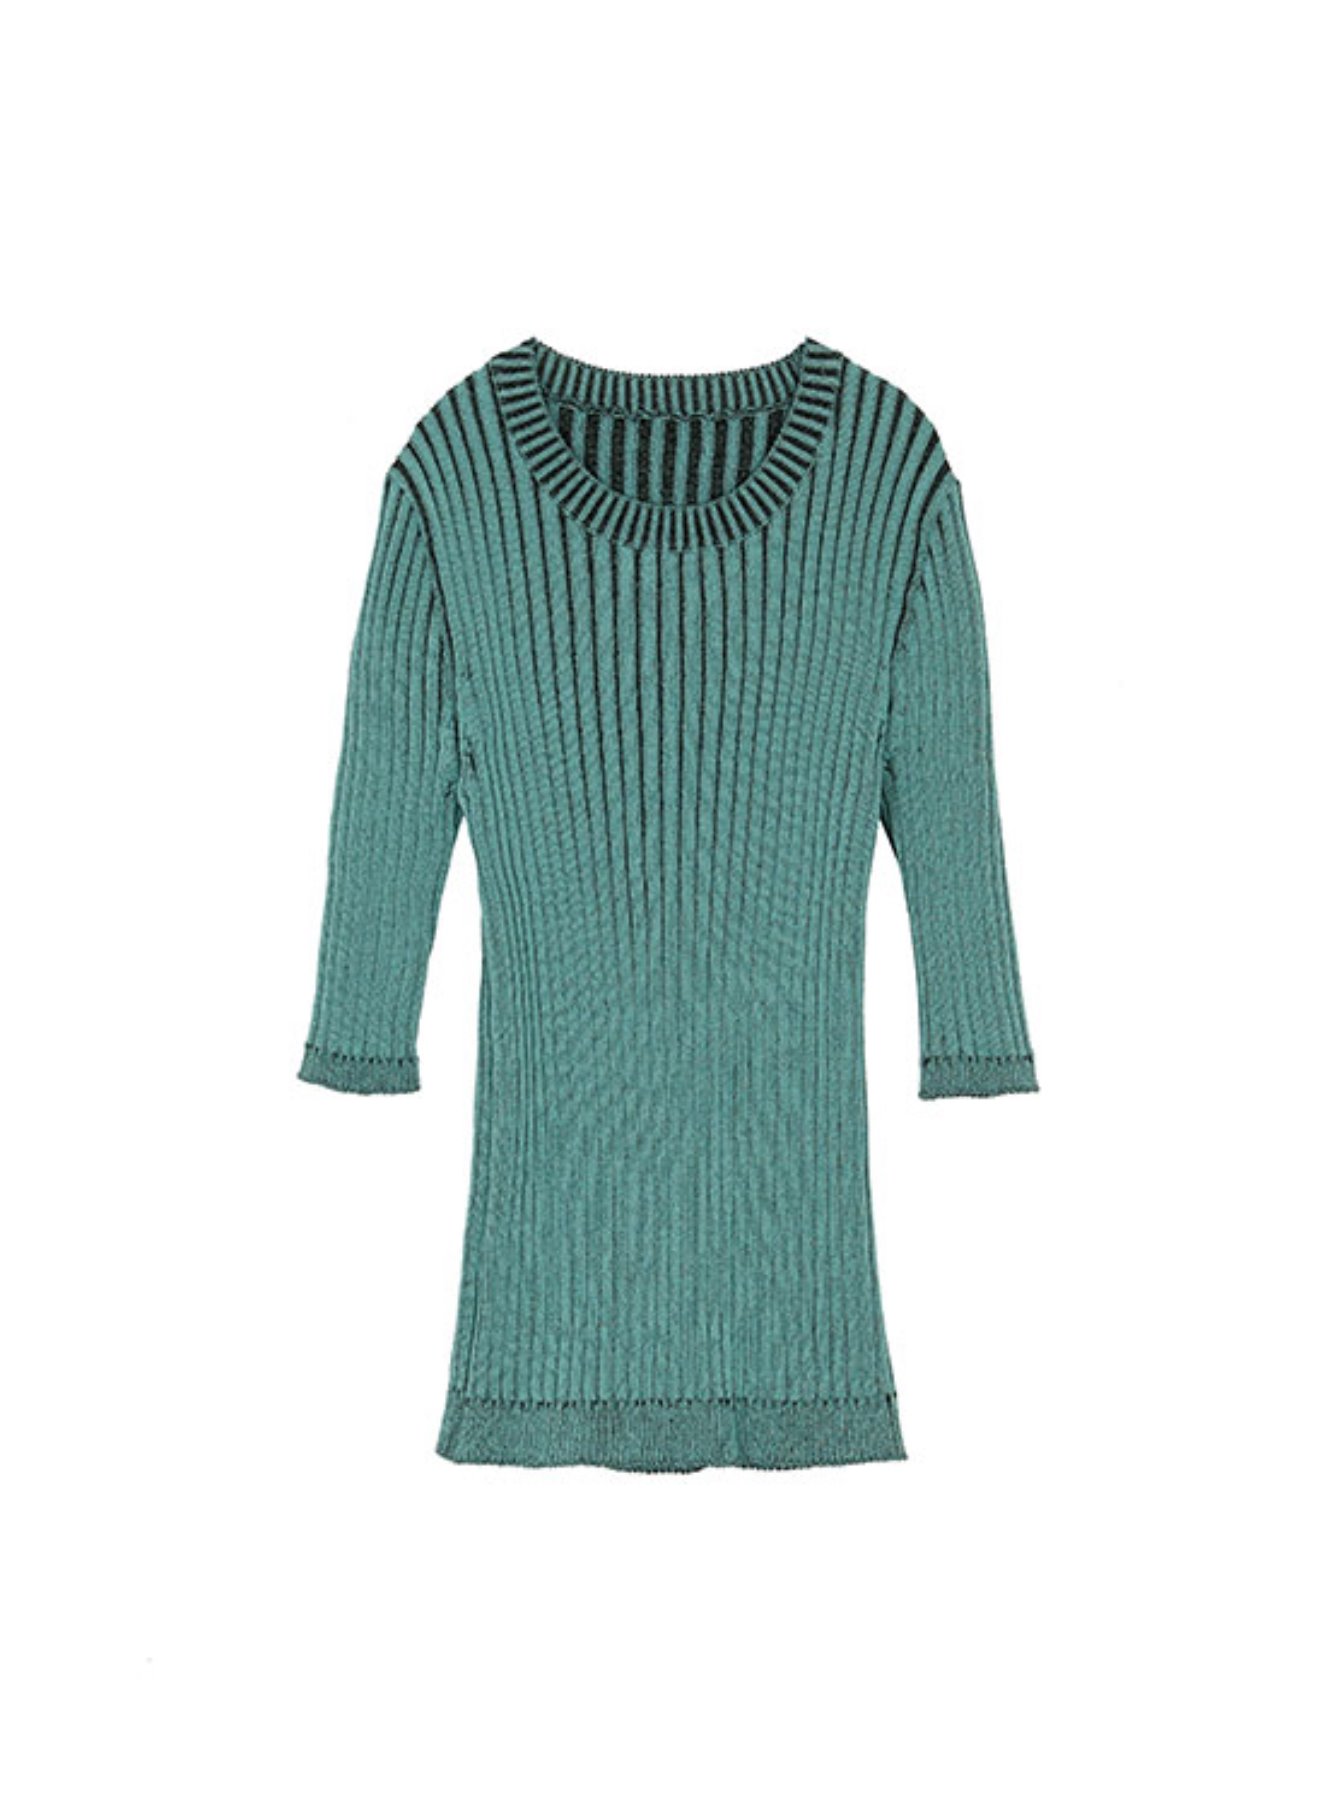 Two-tone Ribbed-knit Top in Mint VK2MP133-31